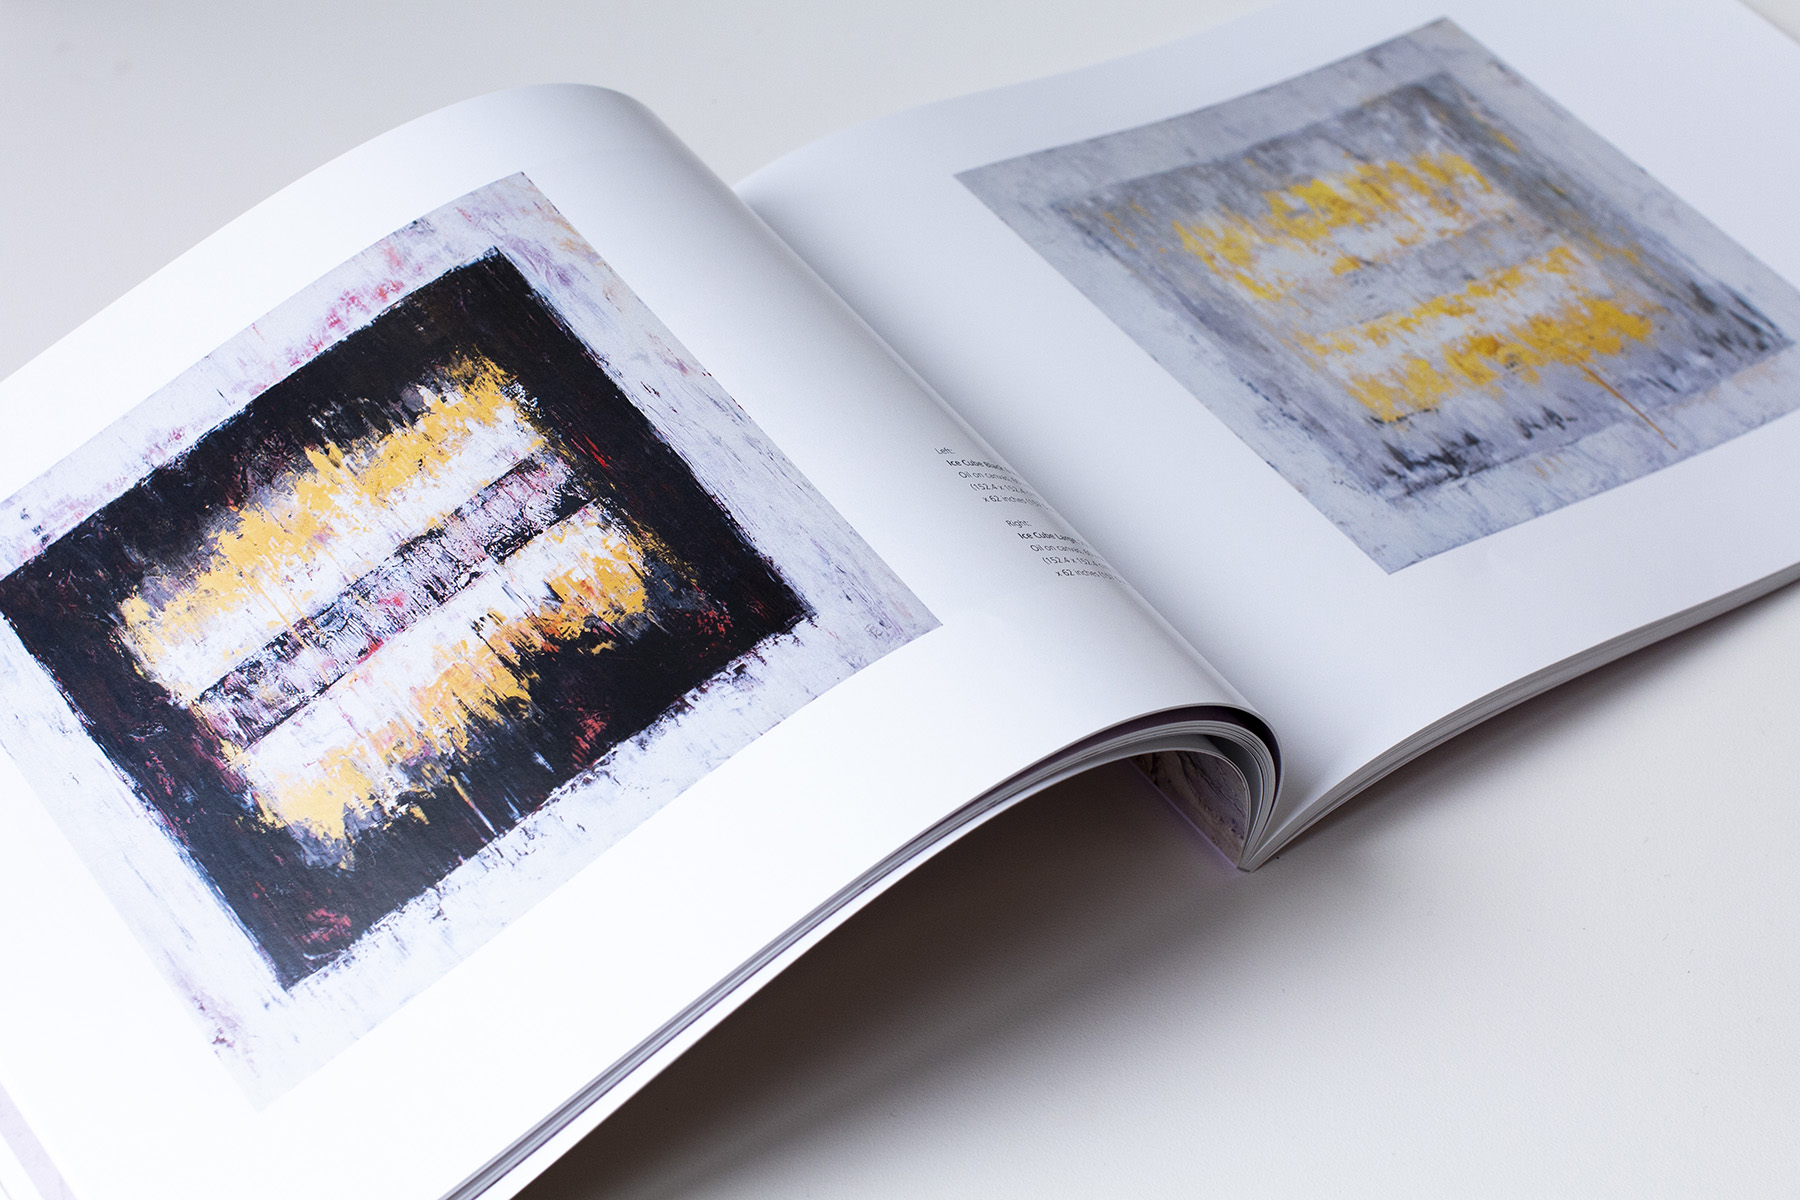  Exhibition Catalog of  Lyrical Abstraction  